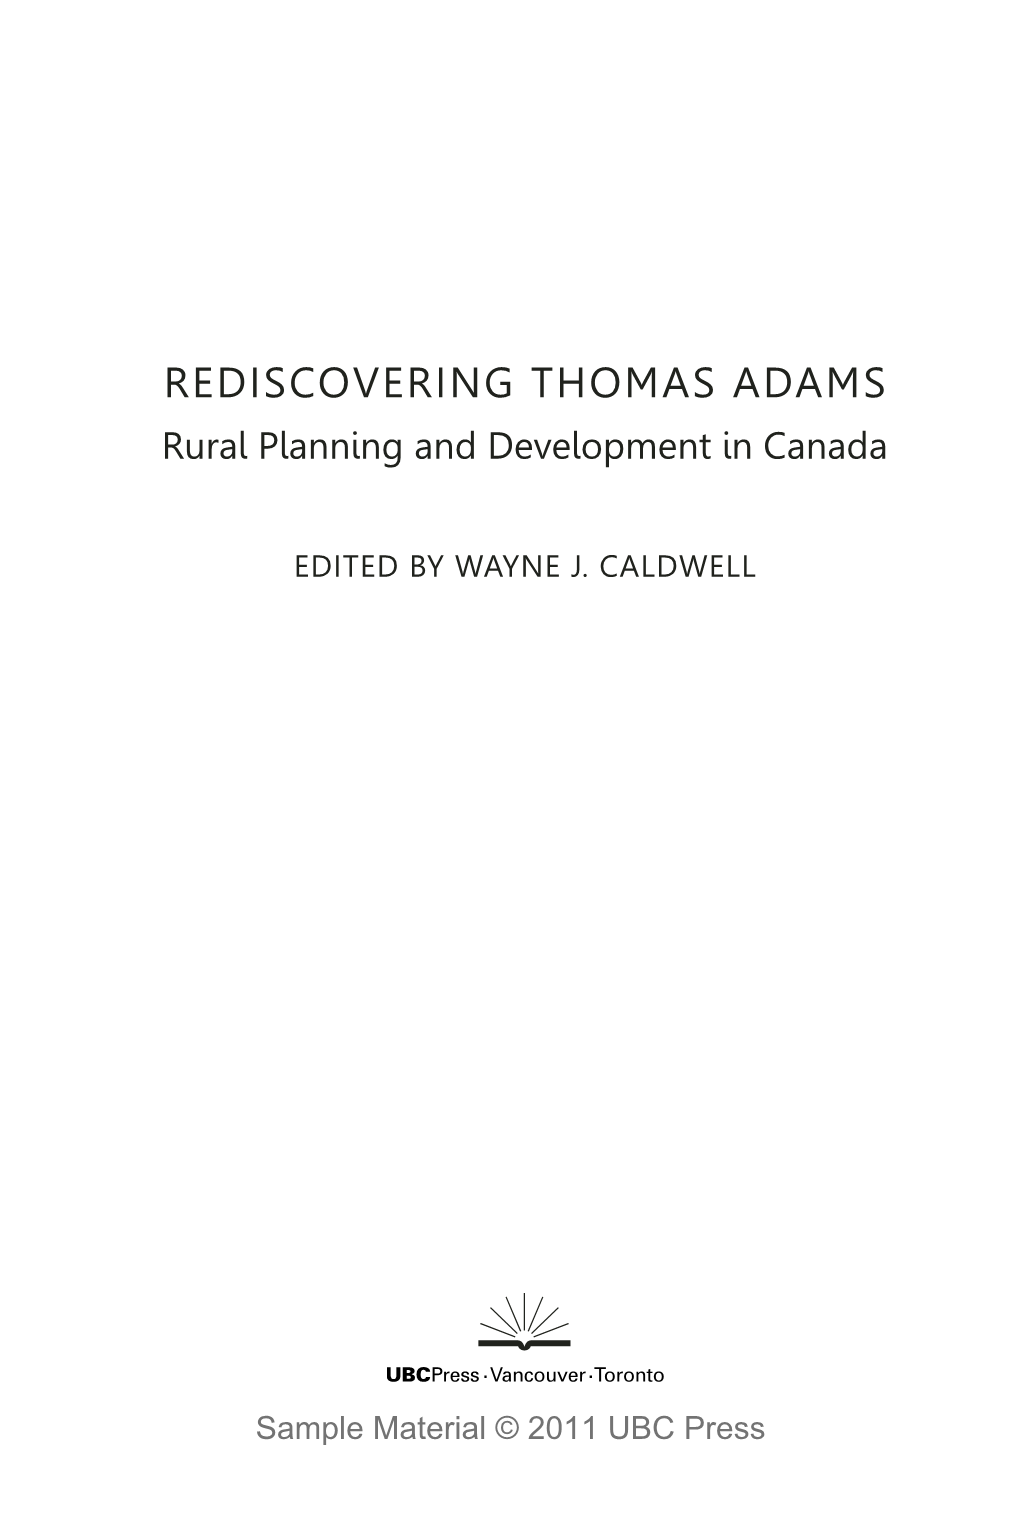 REDISCOVERING THOMAS ADAMS Rural Planning and Development in Canada